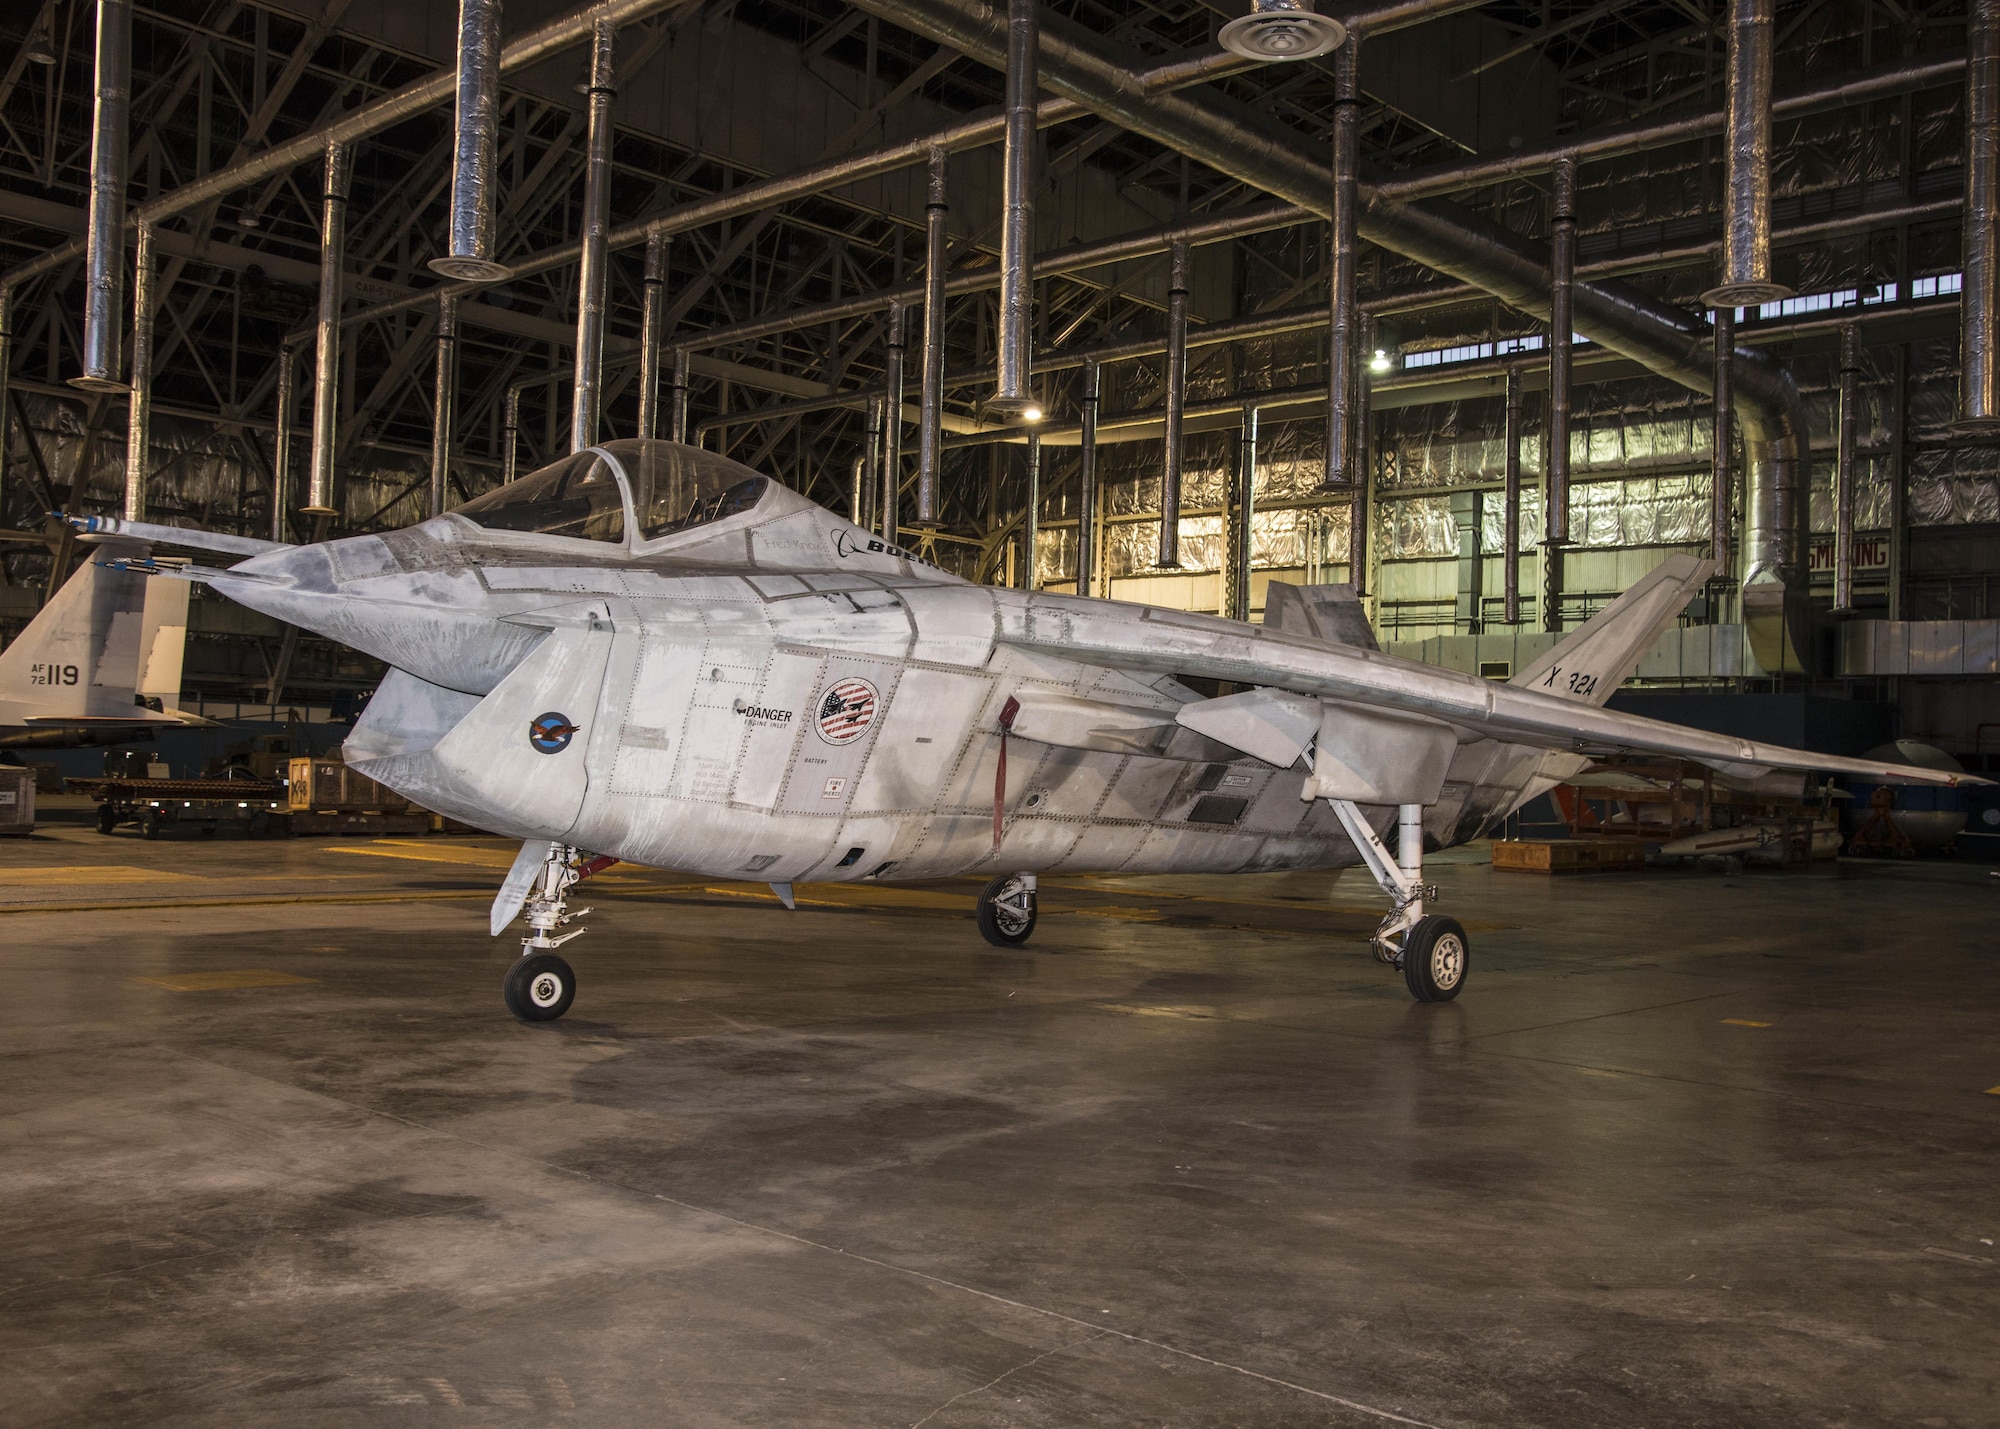 DAYTON, Ohio -- The Boeing X-32A in a storage building at the National Museum of the U.S. Air Force on Nov. 20, 2016. (U.S. Air Force photo by Ken LaRock)